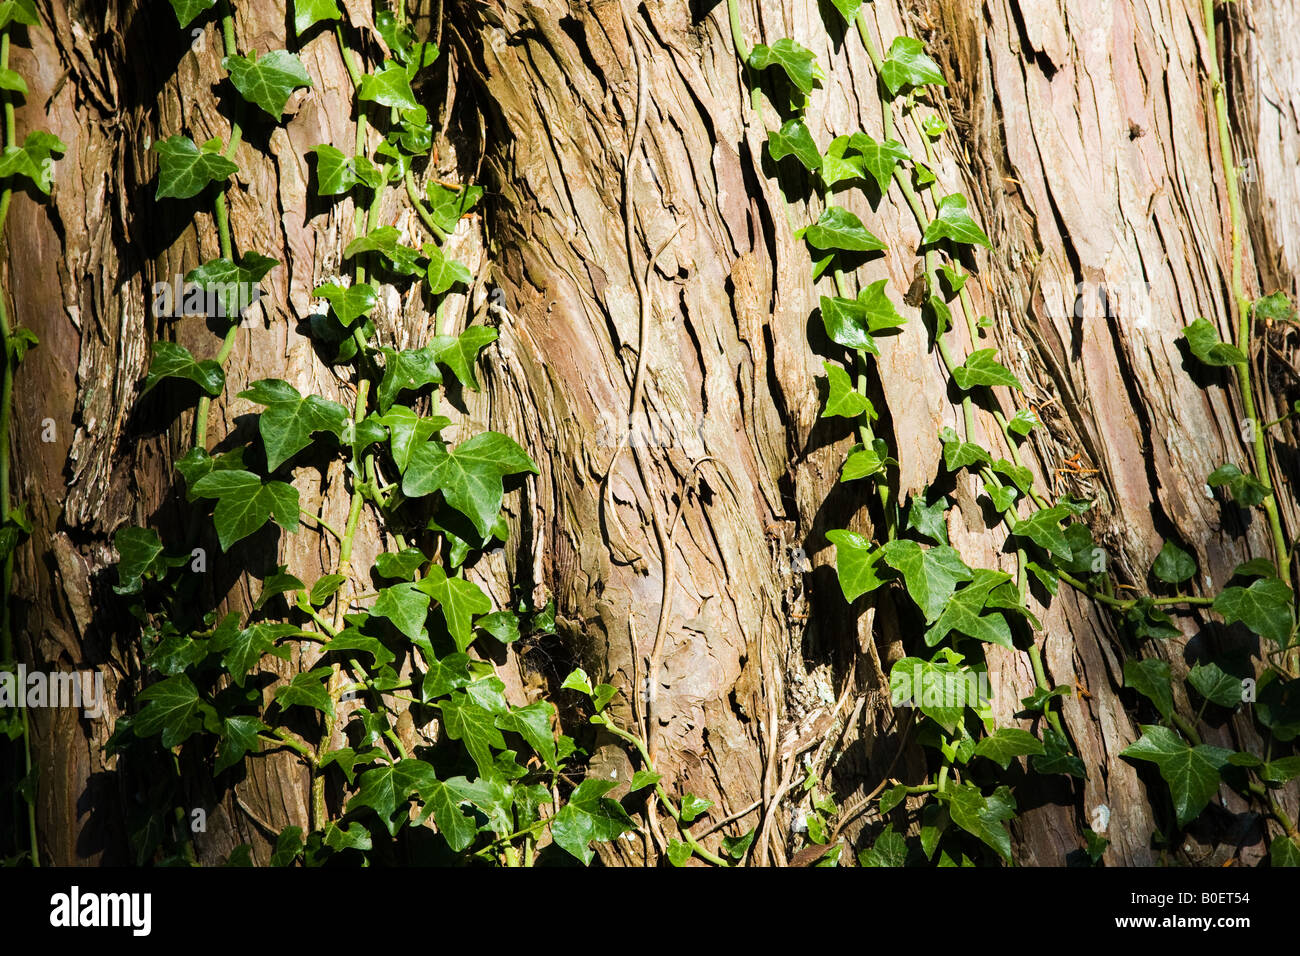 Ivy growing on a tree trunk Herefordshire England United Kingdom Stock Photo